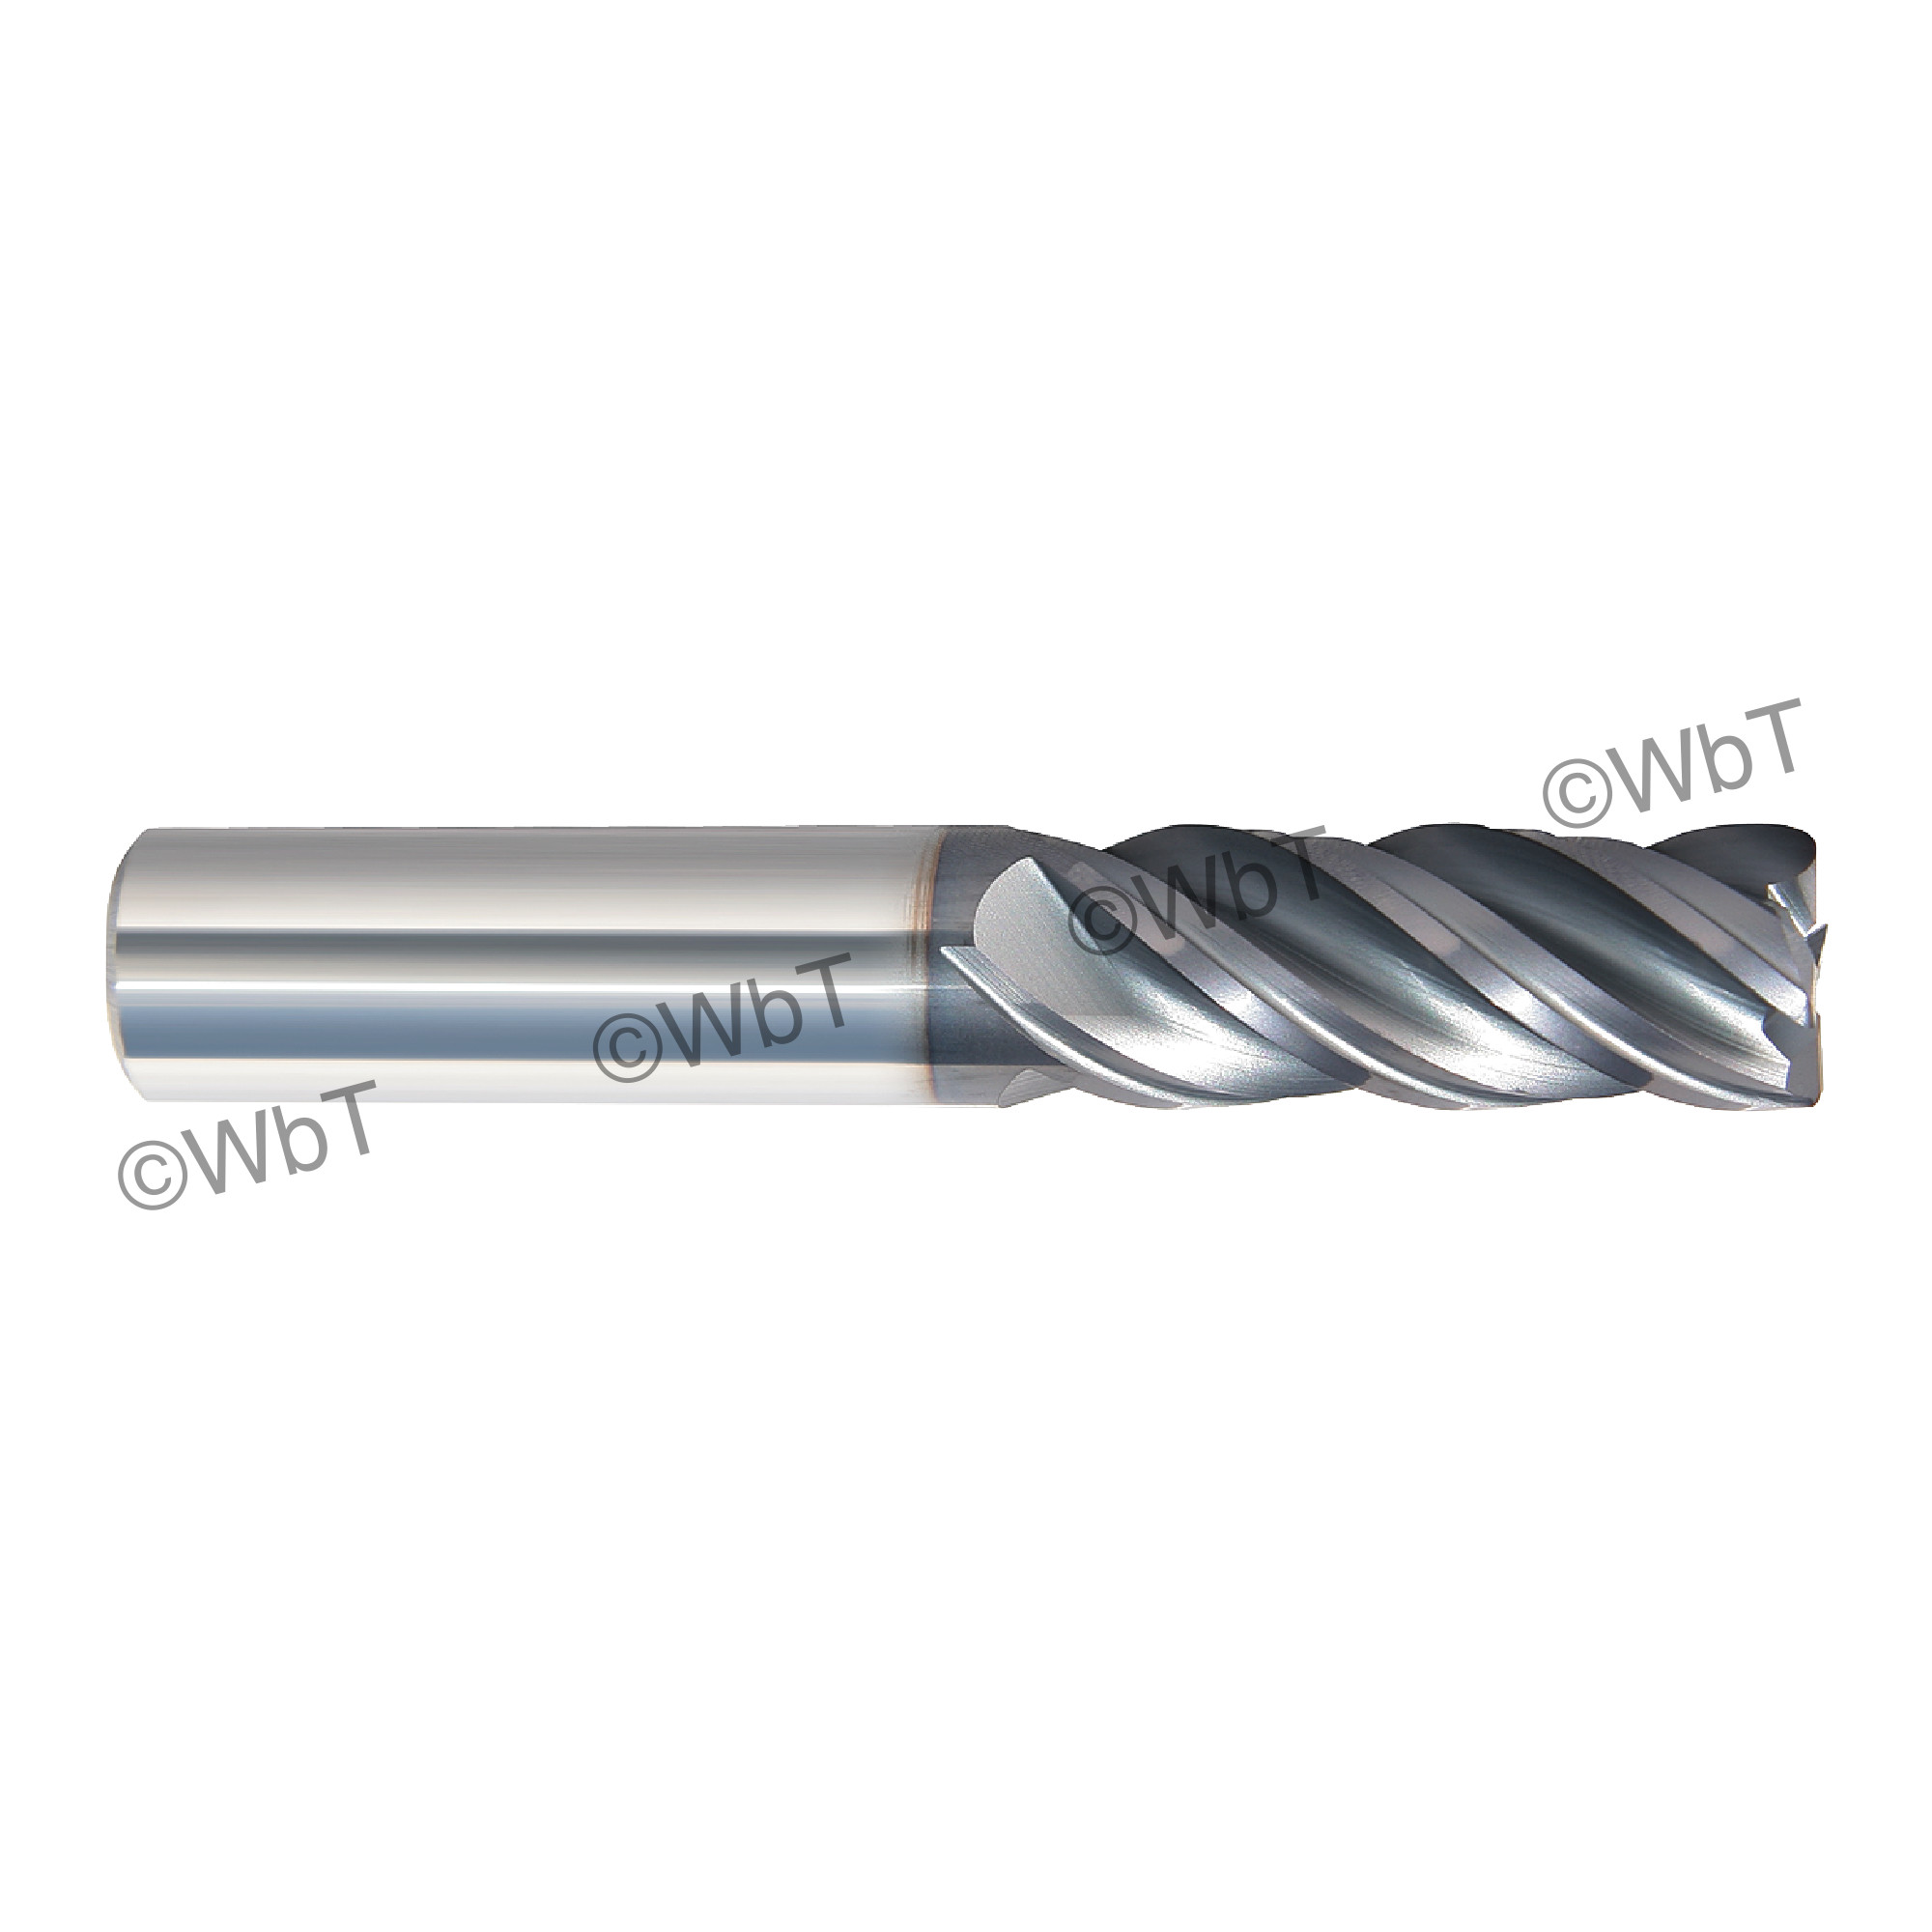 Rushmore USA 1/2" x 1-1/4" Flute Solid Carbide Variable Helix Unequal Index AlTiN Coated Corner Radius 4 Flute Roughing 